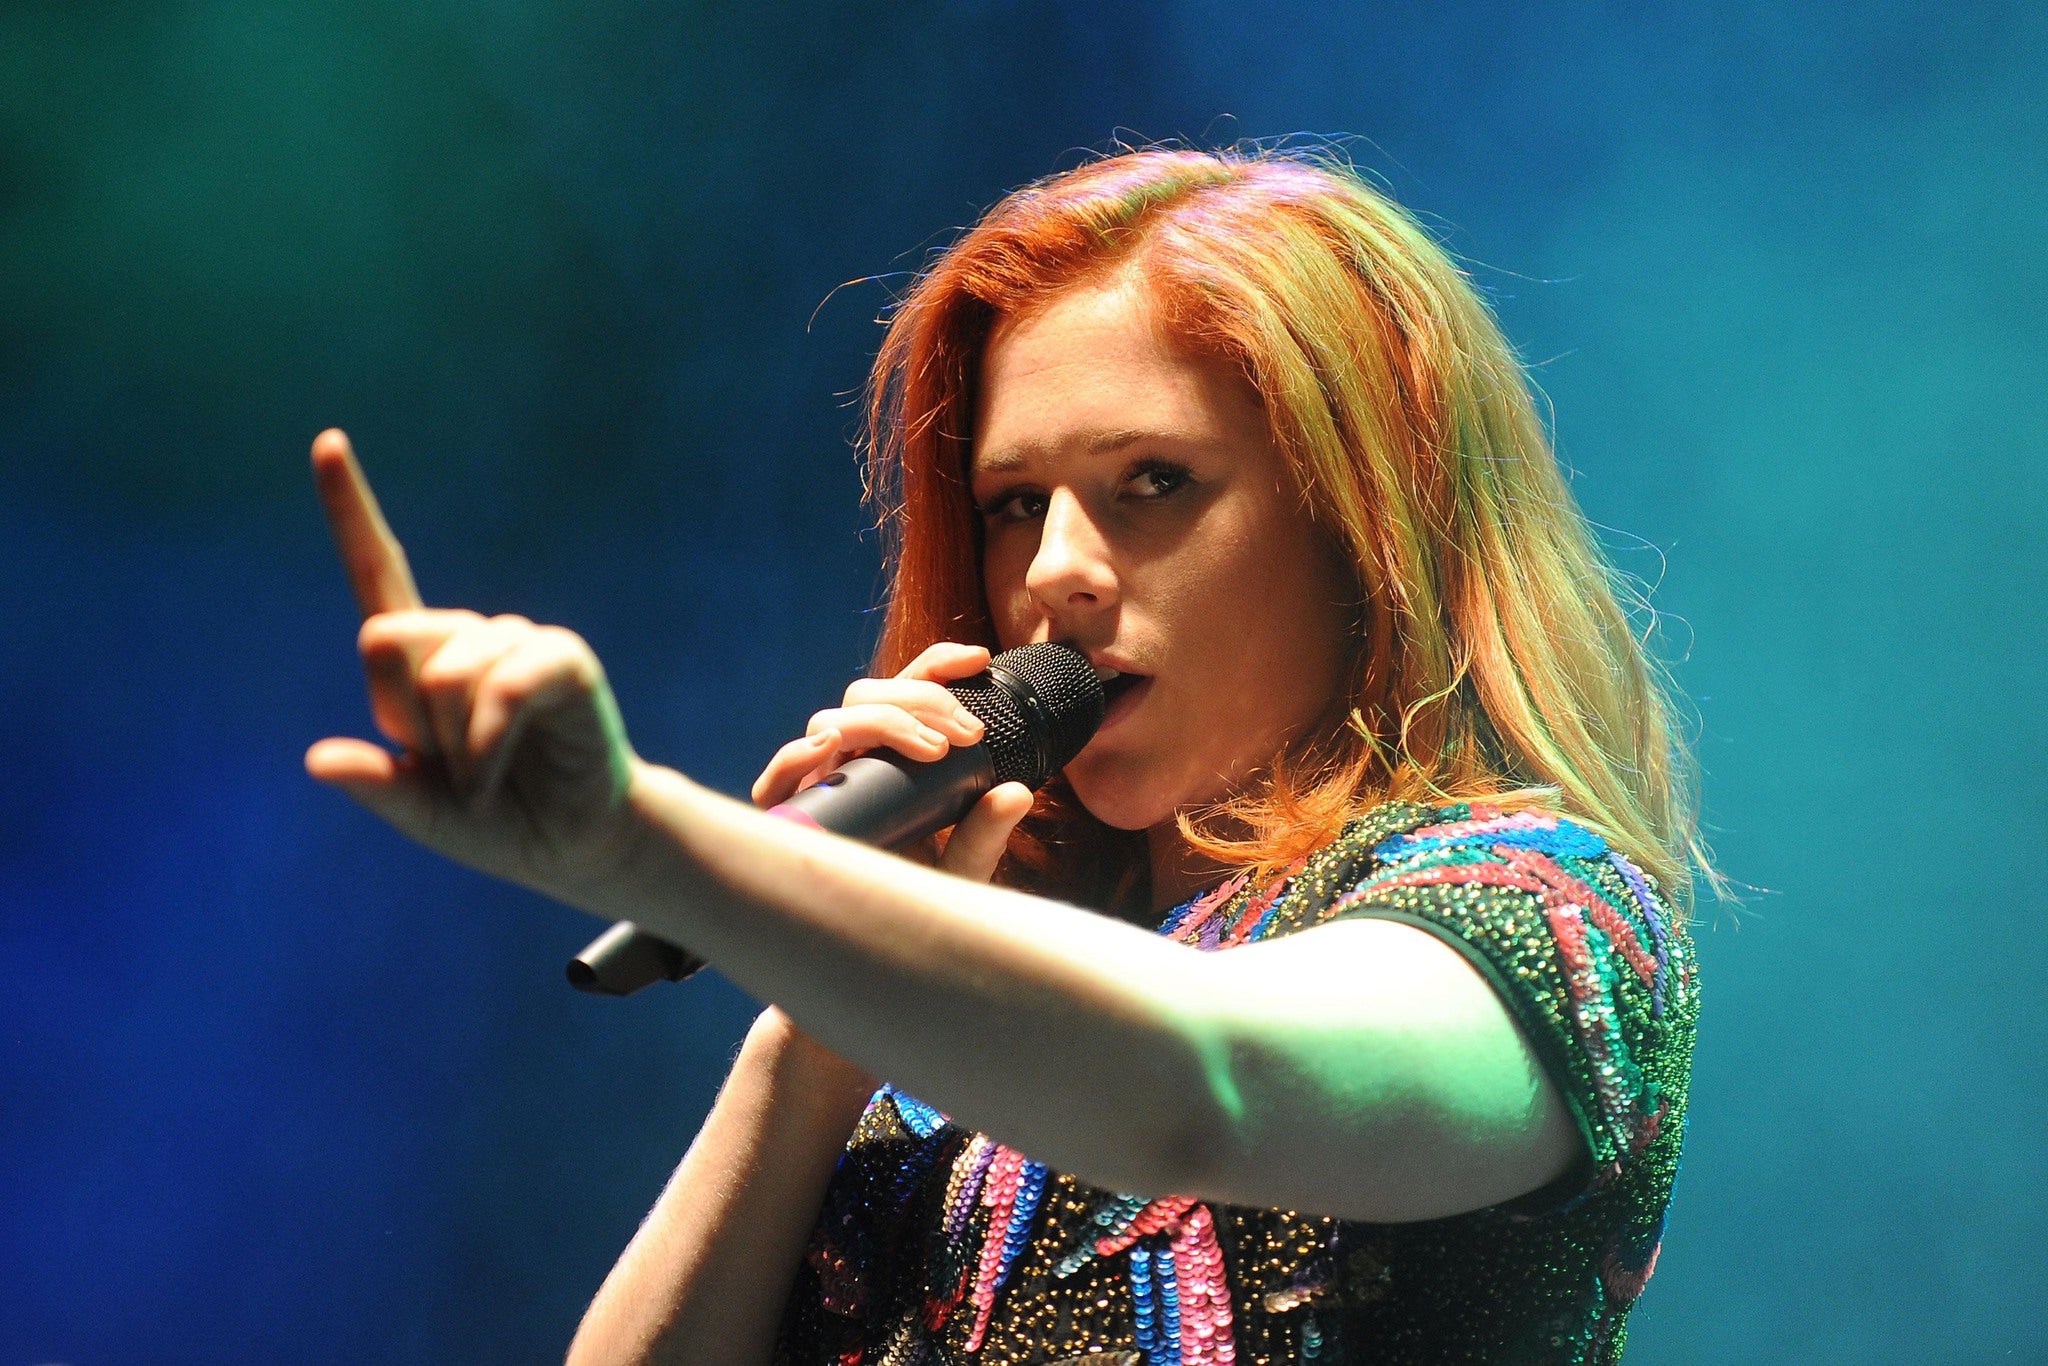 Singer Katy B has achieved her first UK number one with album 'Little Red'